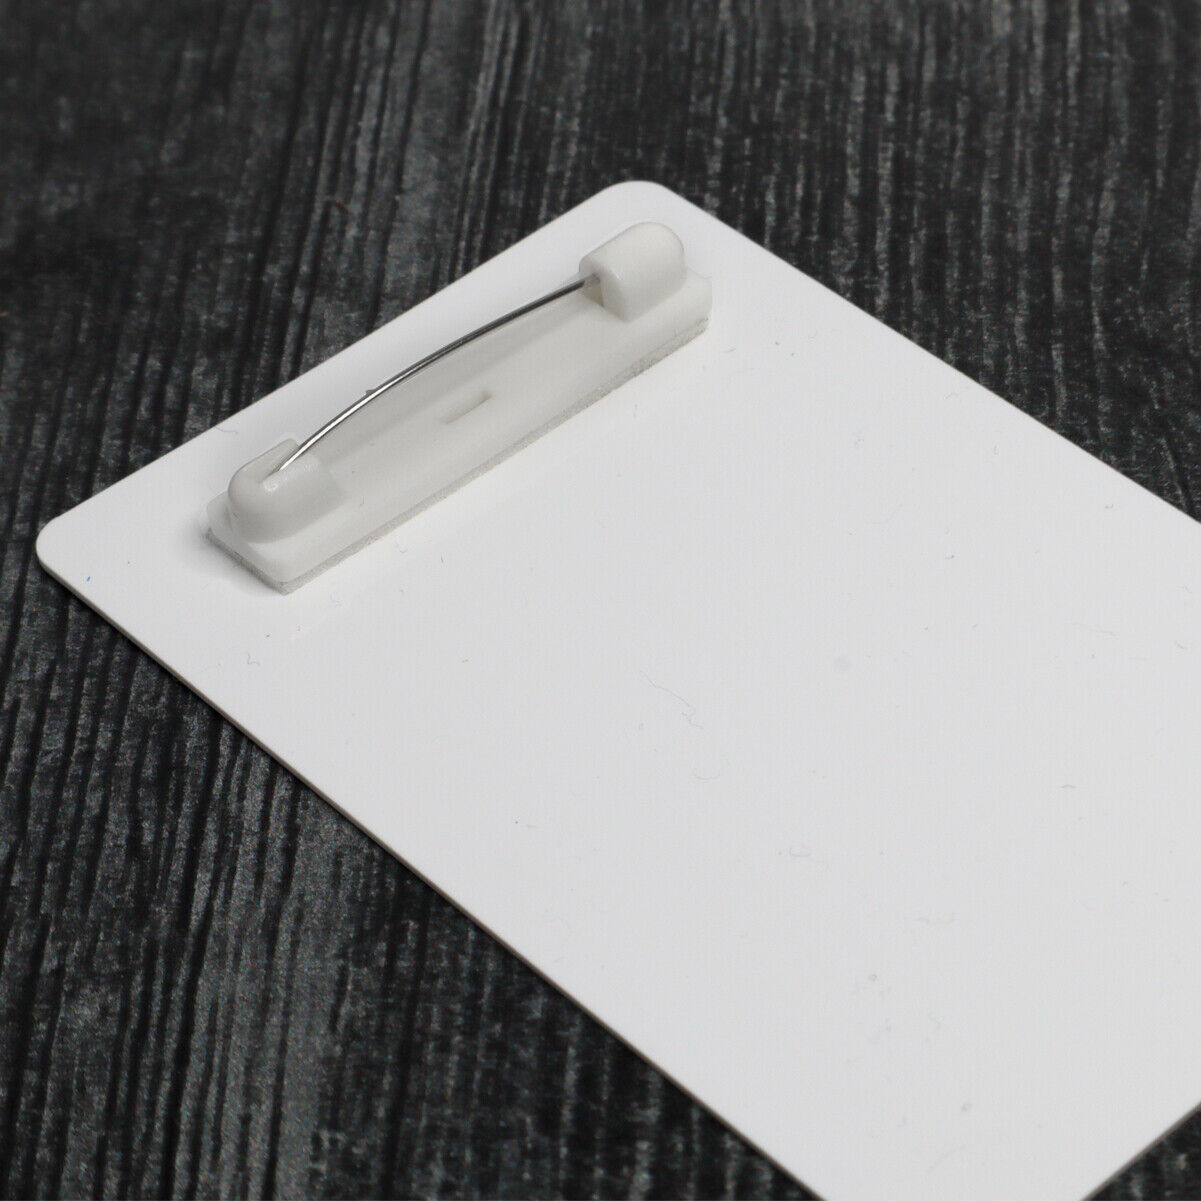 100 Premium Safety Pin Bars with Adhesive Sticky Back for Name Tags & ID Badges Specialist ID 6920-3655 - фотография #5